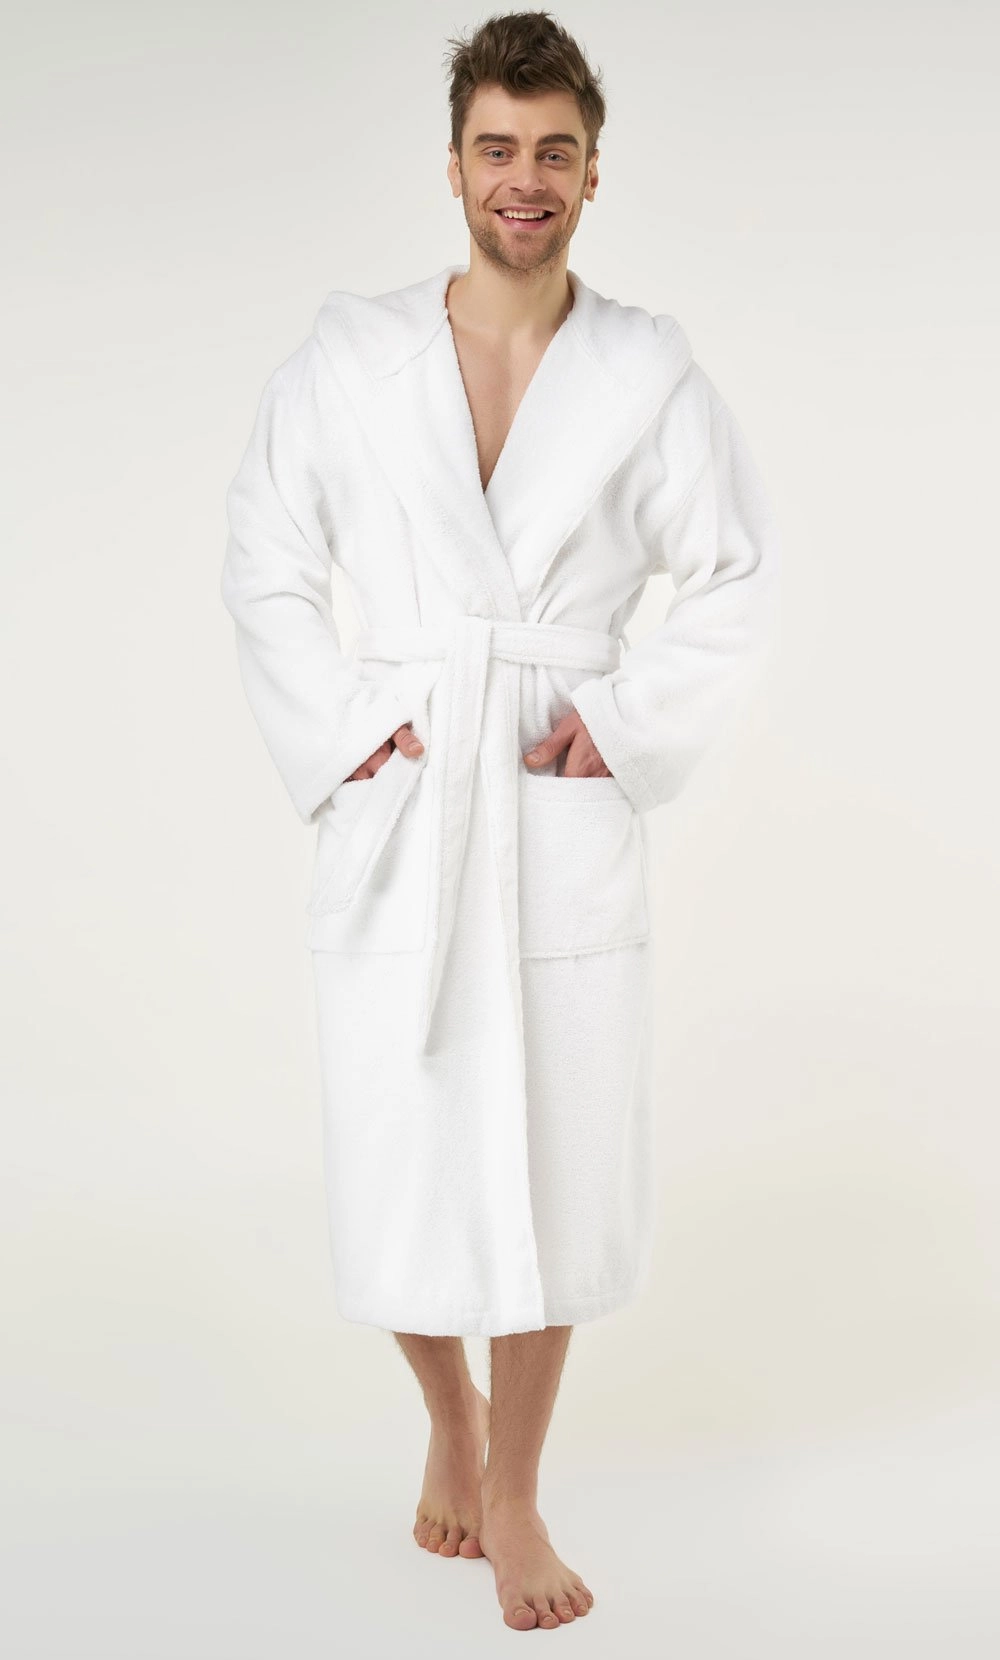 Men :: Robes :: Terry Cloth Robes :: 100% Turkish Cotton White Heavy Weight Hooded  Terry Bathrobe - Wholesale bathrobes, Spa robes, Kids robes, Cotton robes,  Spa Slippers, Wholesale Towels